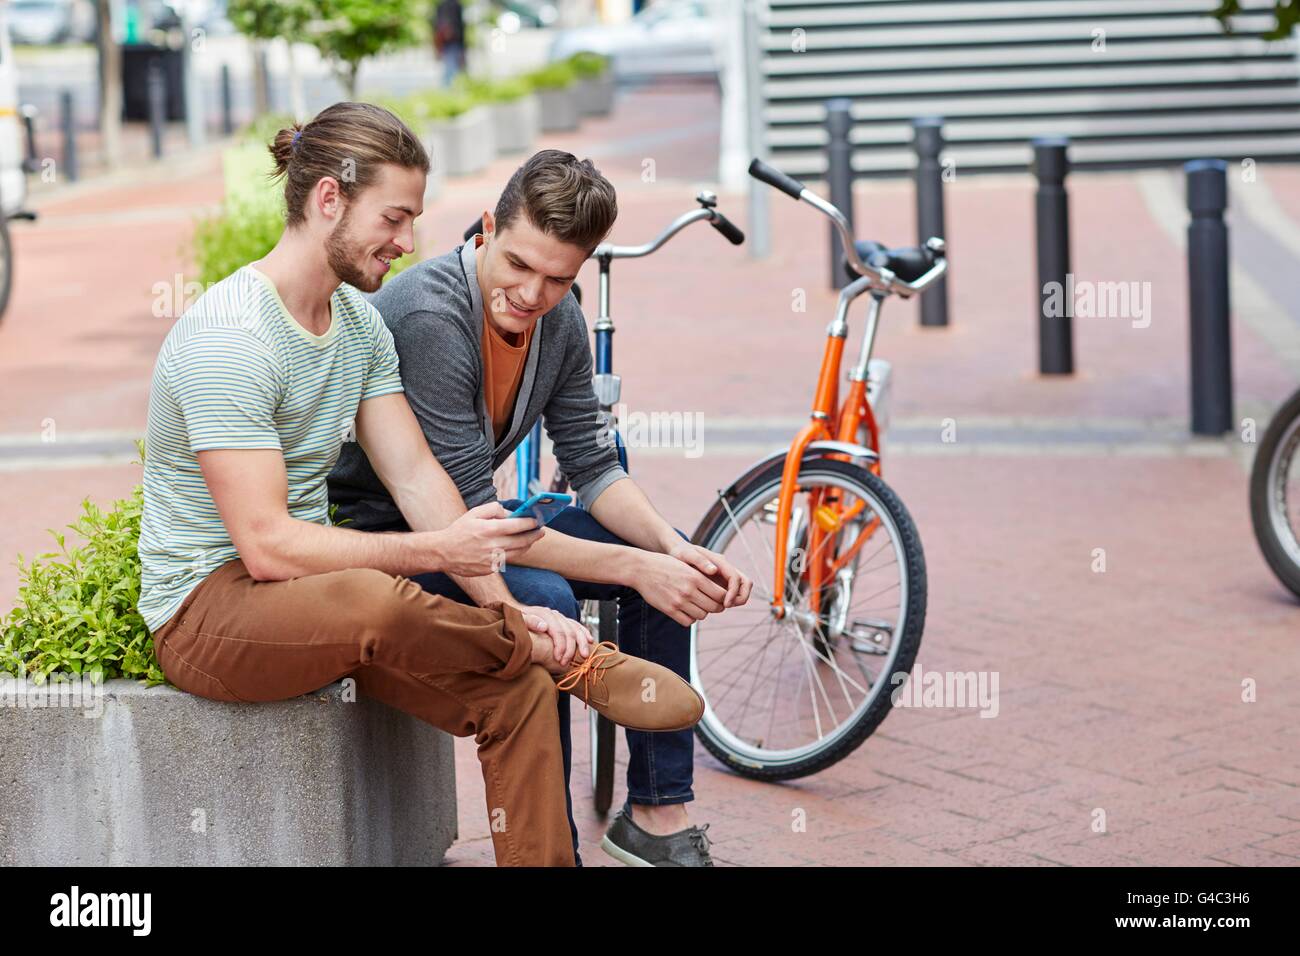 MODEL RELEASED. Two young men sitting on wall with smartphone. Stock Photo